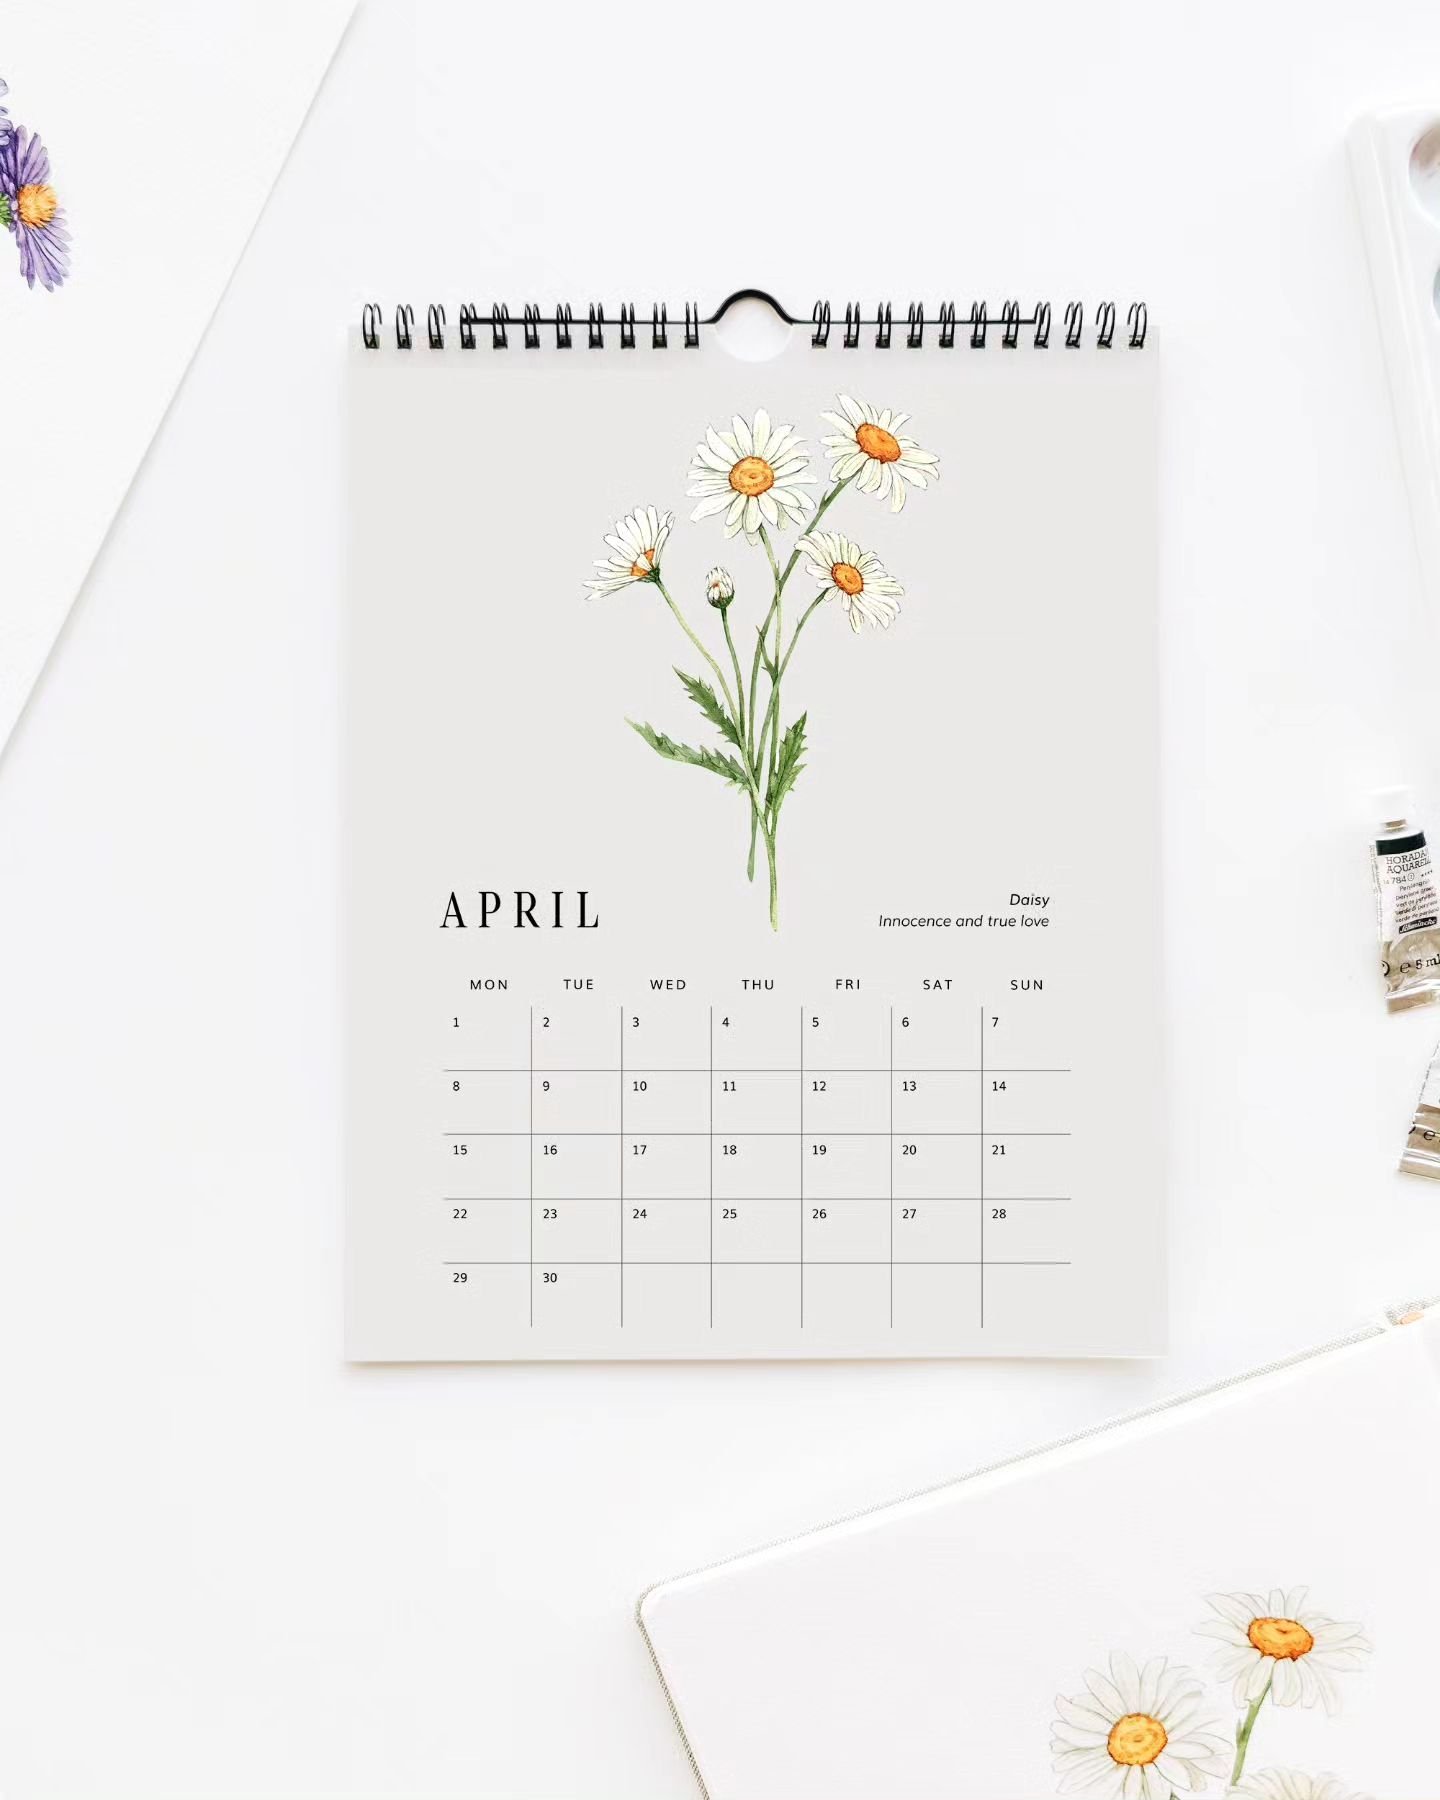 A little late, here's this month's Calendar page. Daisies are April's Birth Flowers and are usually described as a symbol of innocence and true love. I guess for me this flower will forever be associated with that cute game picking petals from a dais